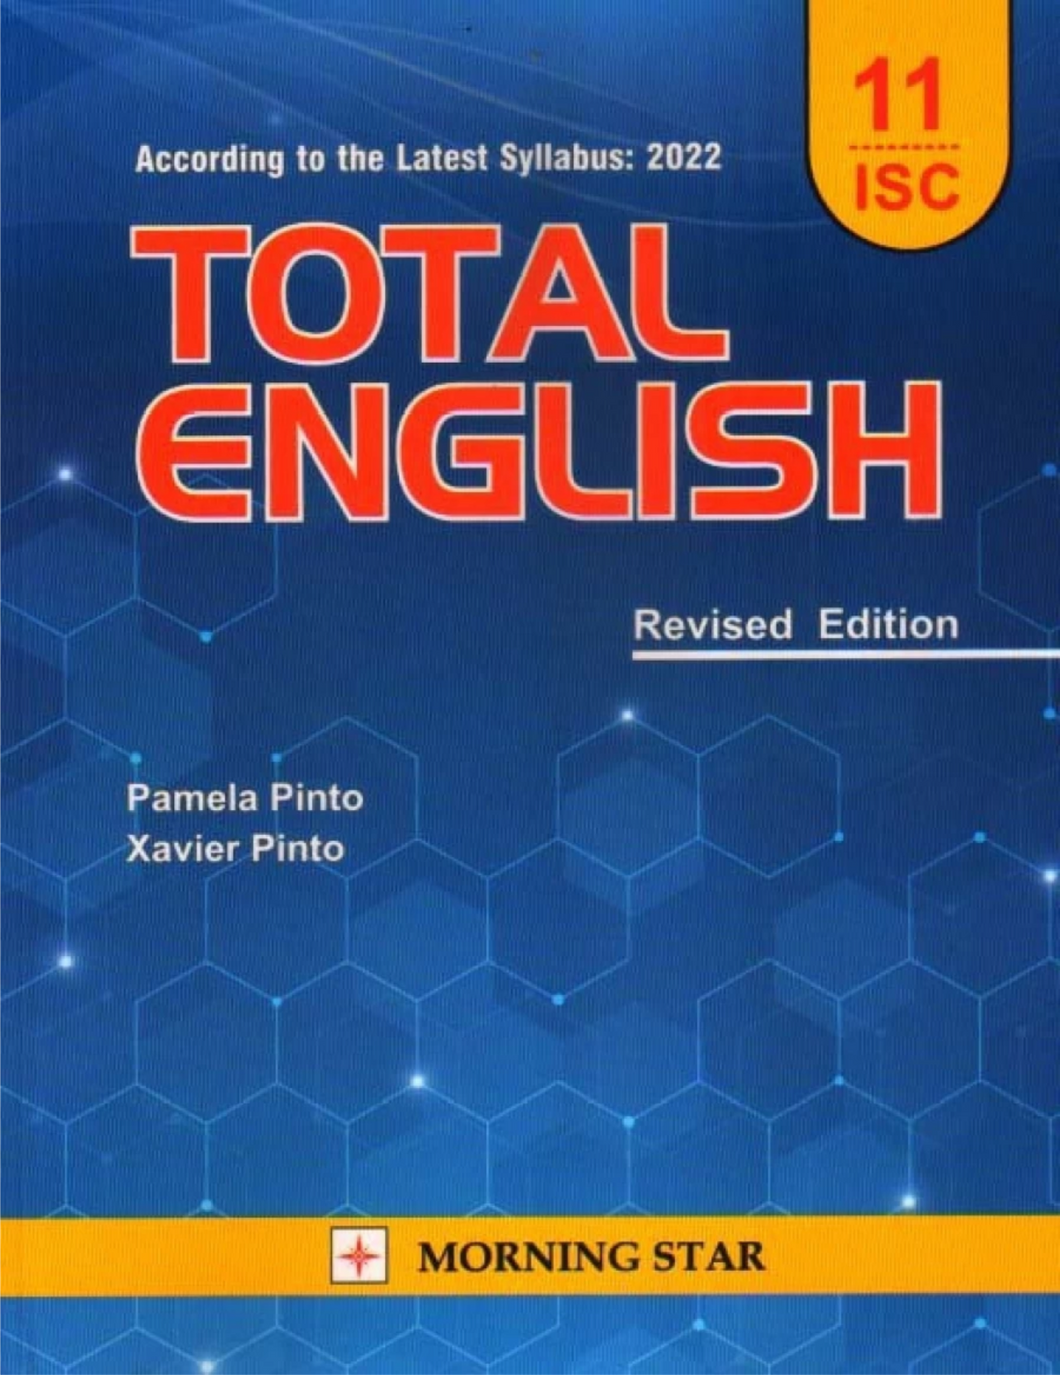 Total English 11th ISC